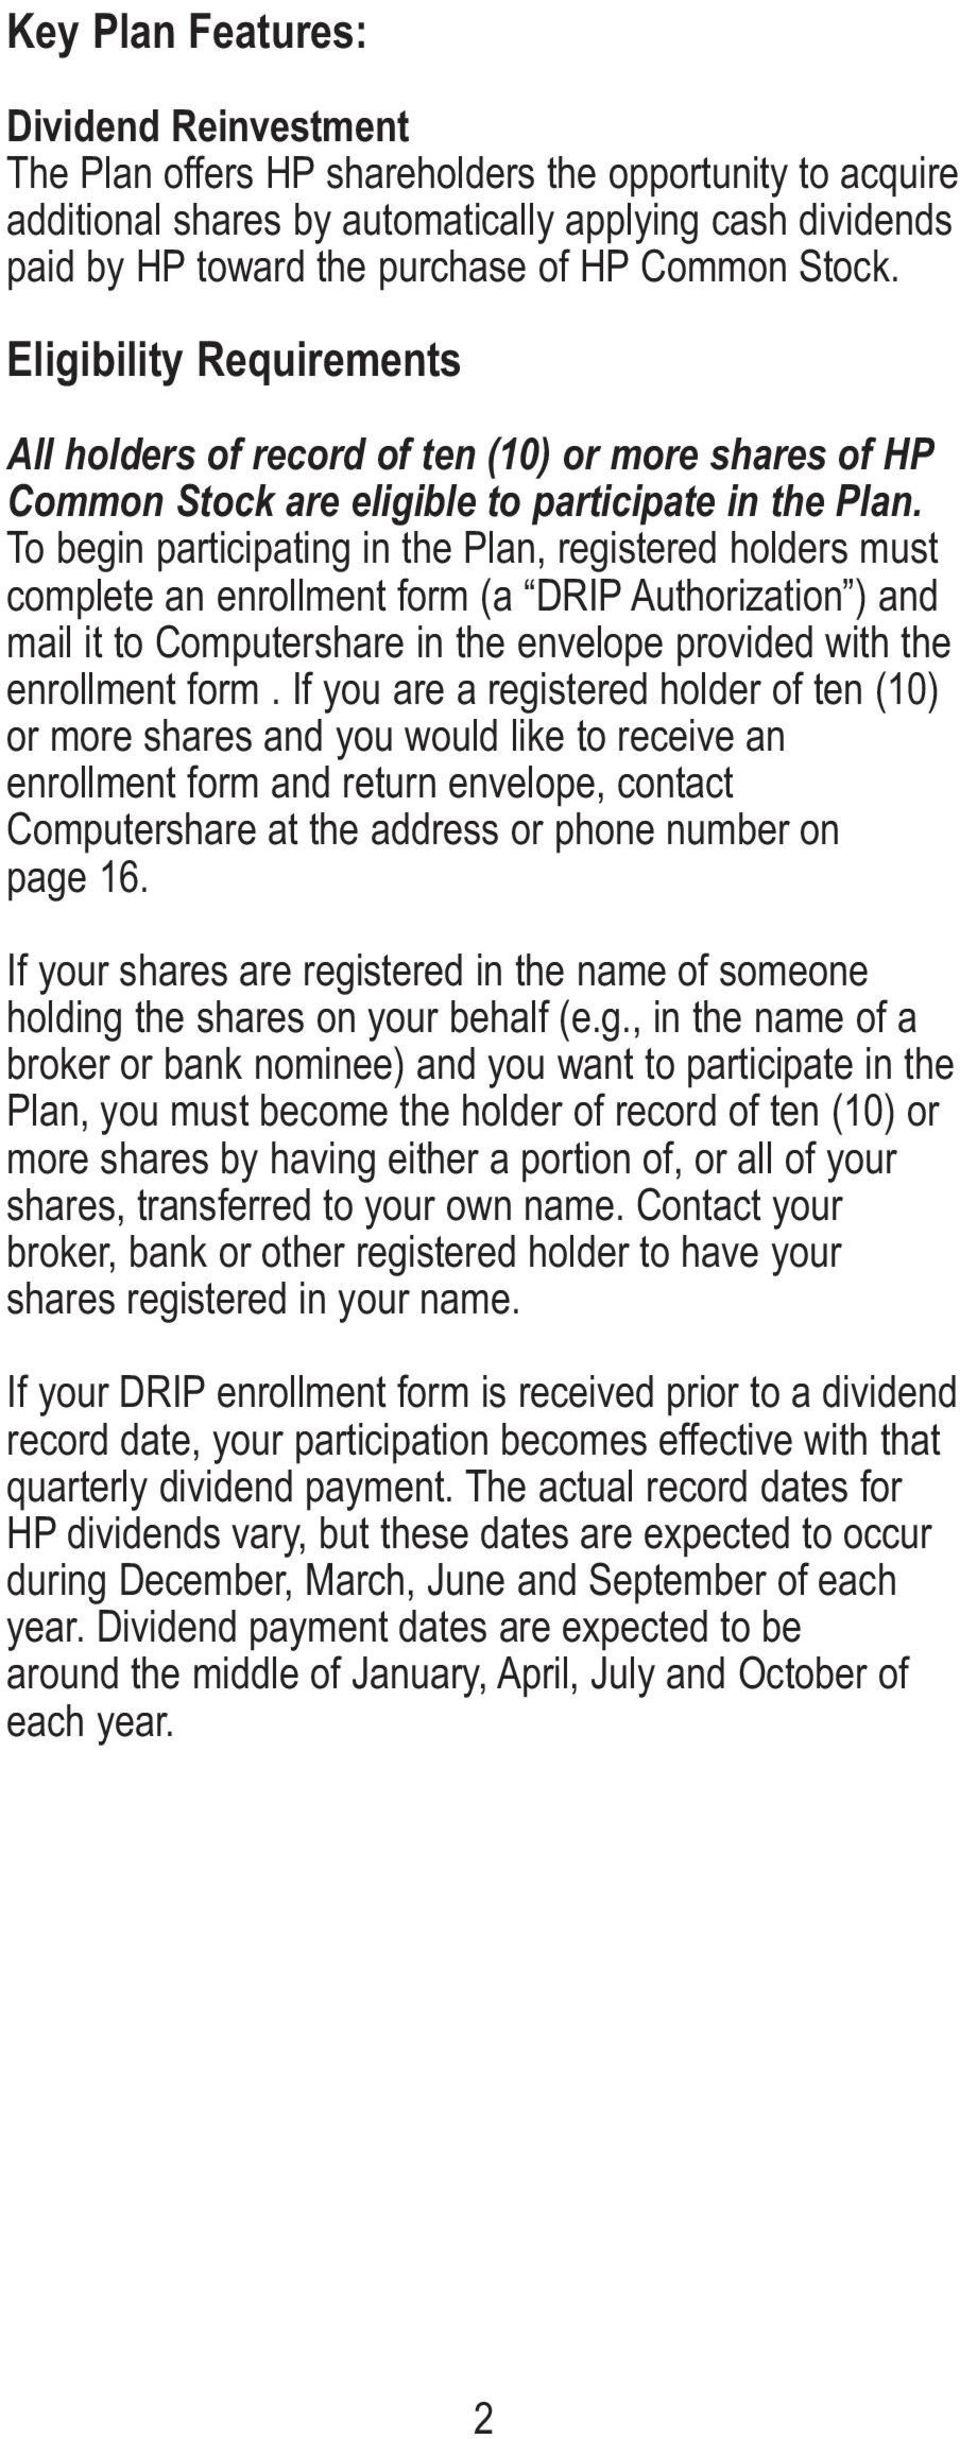 To begin participating in the Plan, registered holders must complete an enrollment form (a DRIP Authorization ) and mail it to Computershare in the envelope provided with the enrollment form.